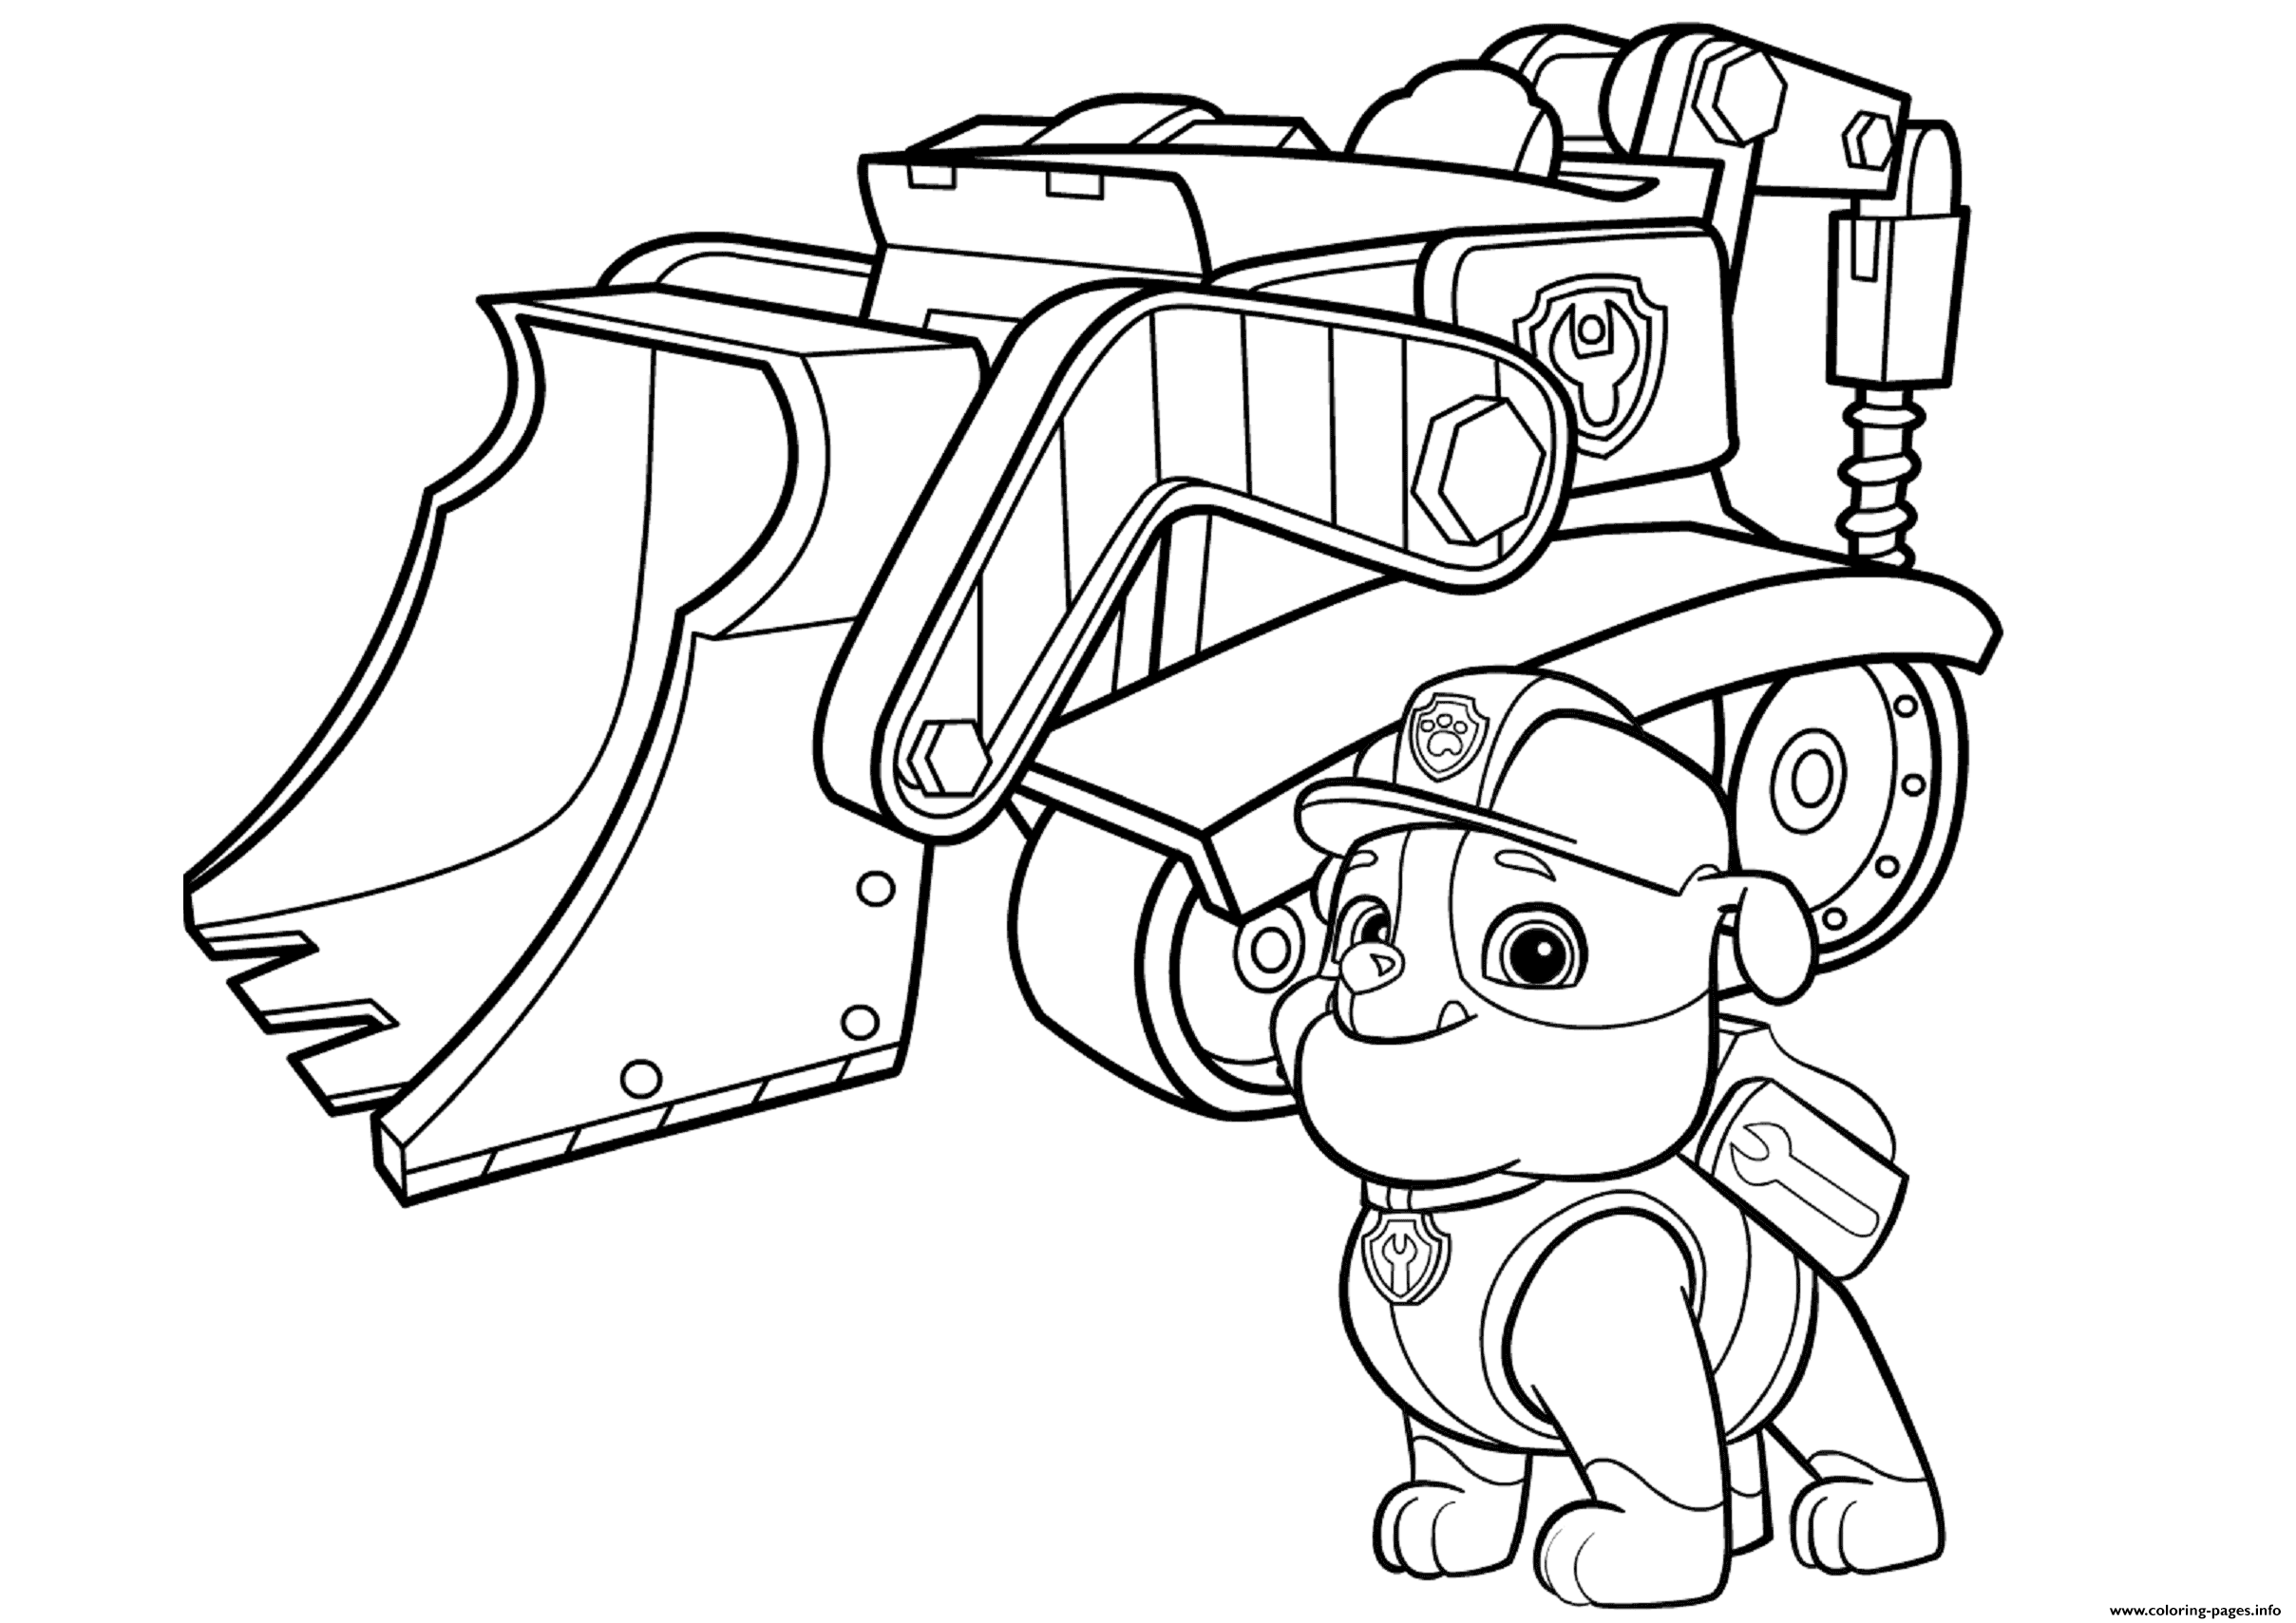 FREE PAW Patrol Coloring Pages - Happiness is Homemade